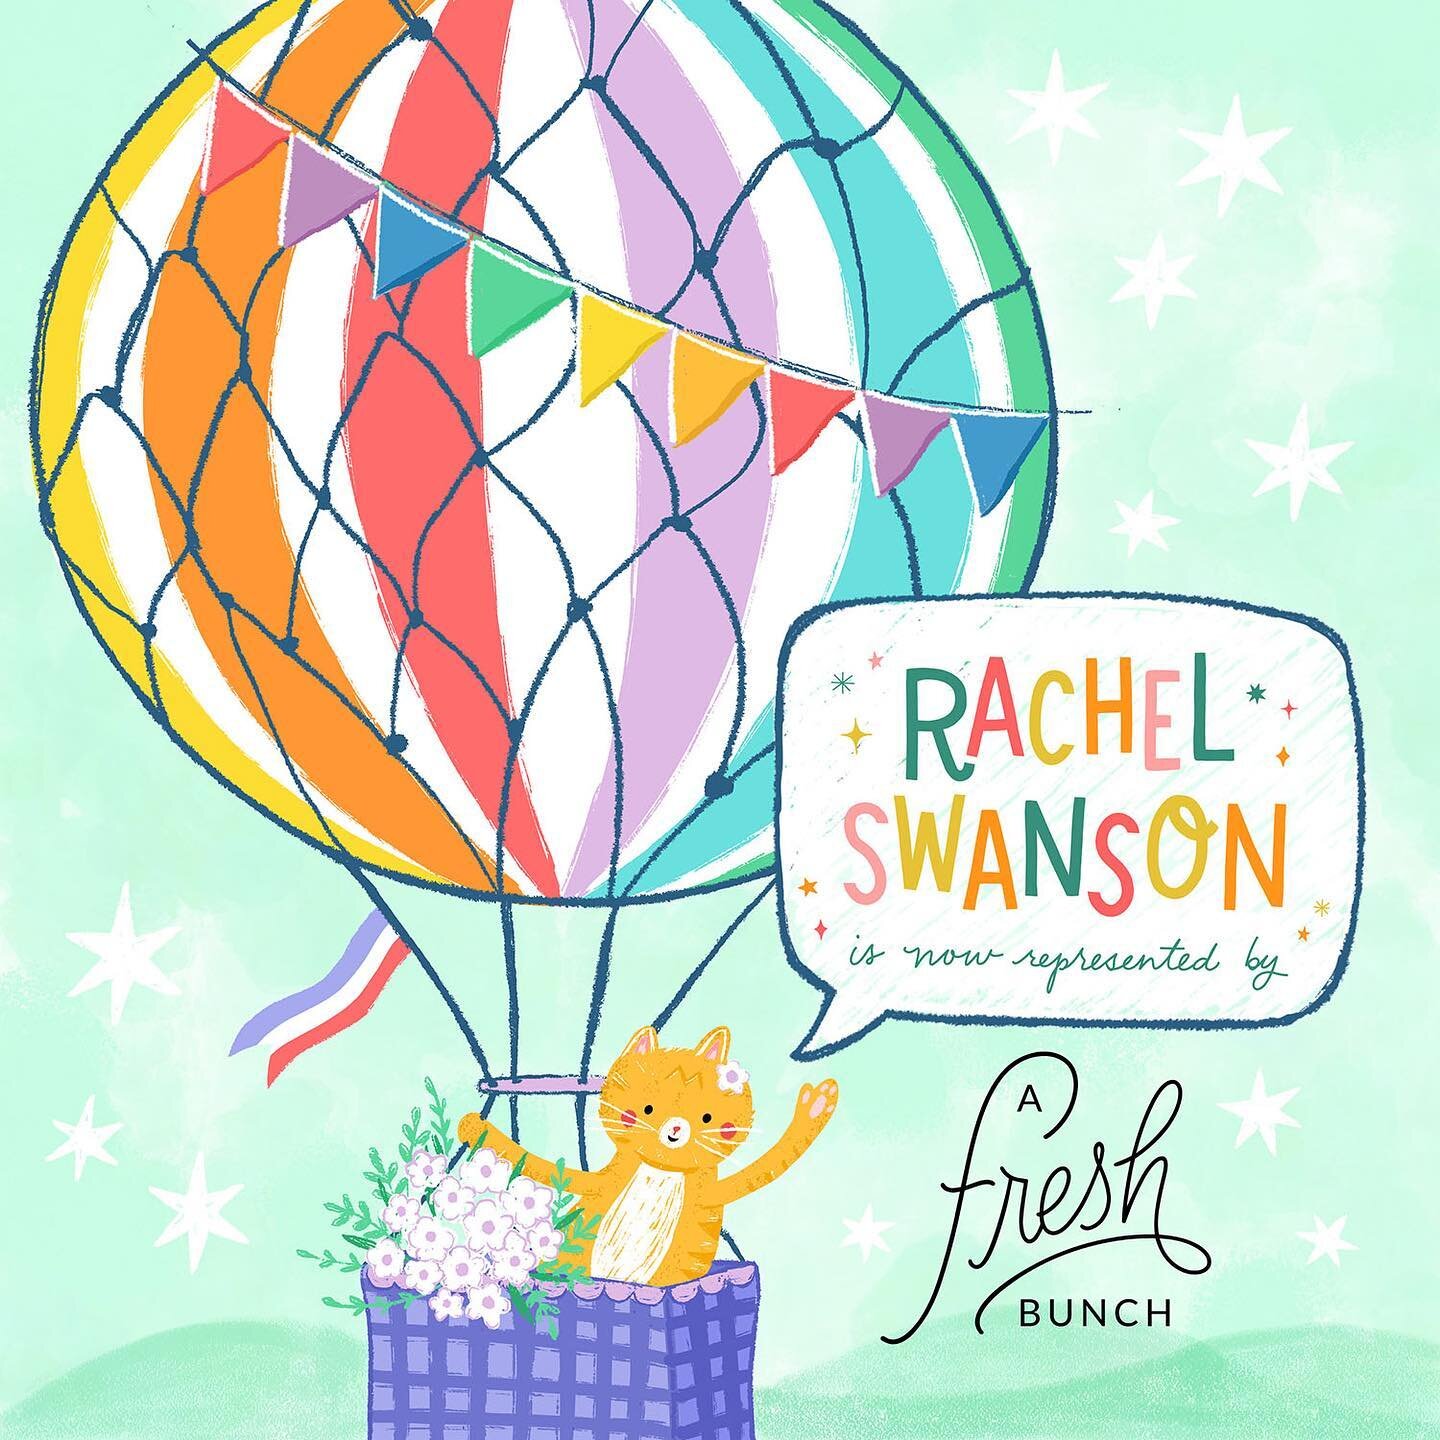 Exciting news! ✨ I&rsquo;m now represented by @afreshbunch and I&rsquo;m so honored to join this group of talented women! I&rsquo;m not sure how many orange cats they can license, but I&rsquo;m testing the limits. 🐱🎈